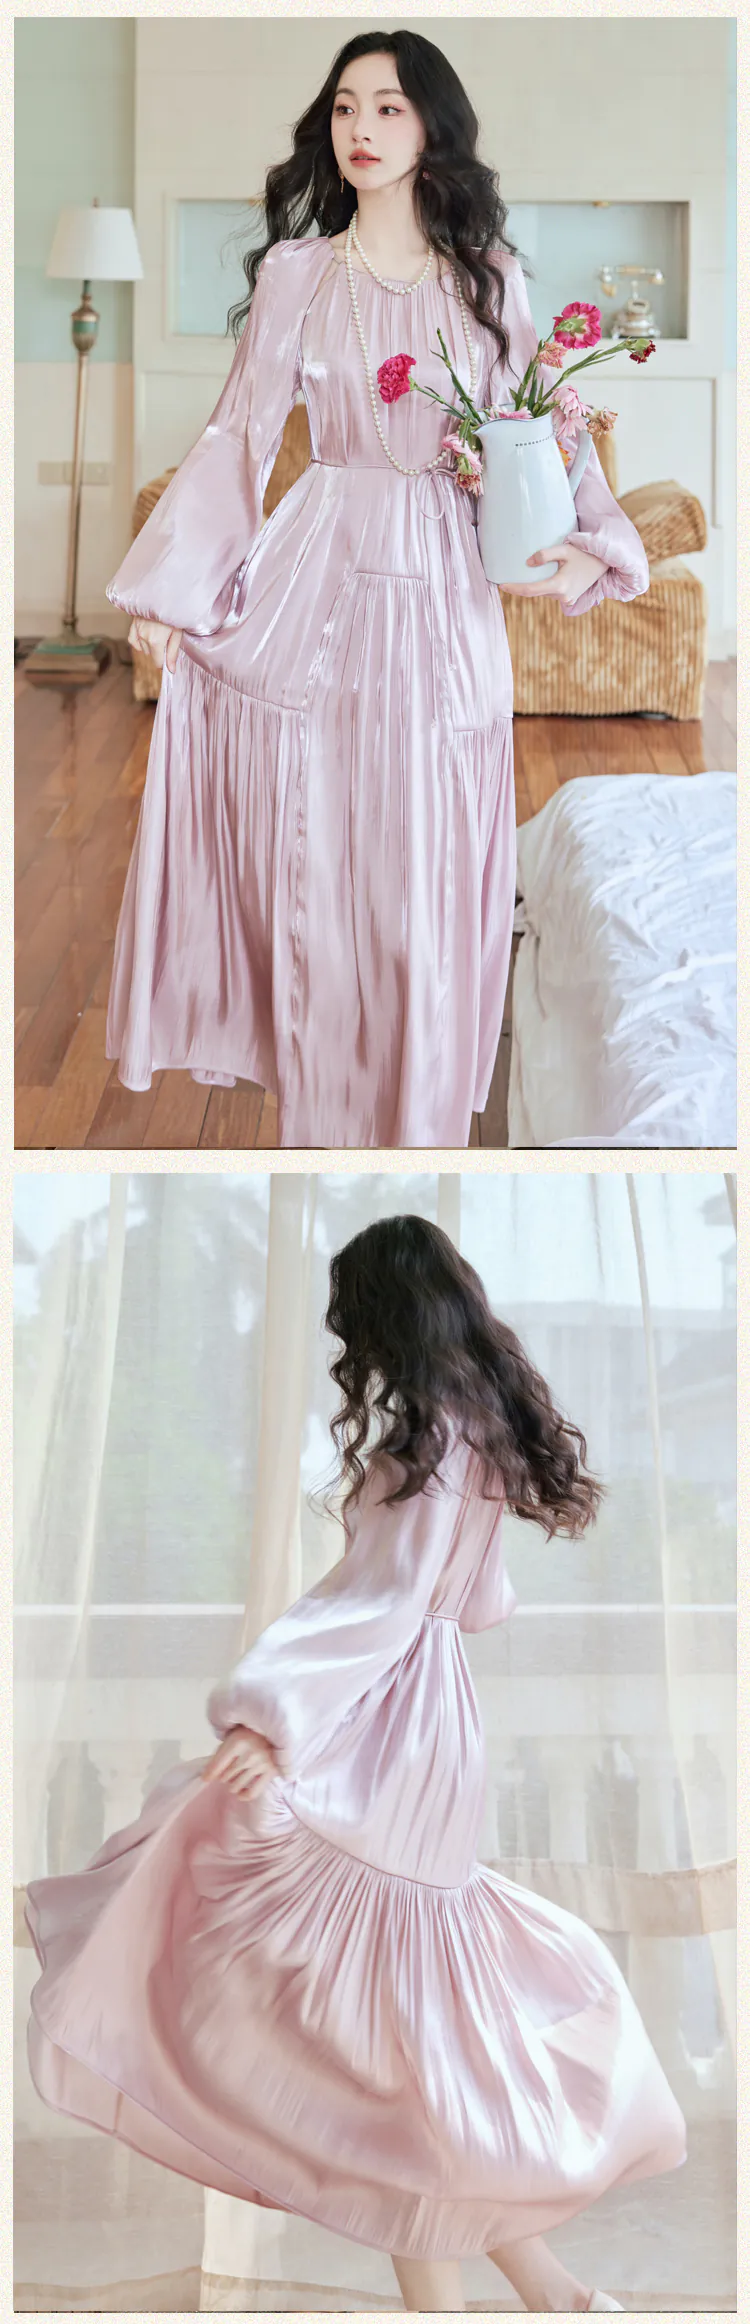 Sweet-French-Style-Round-Neck-Juliet-Sleeve-Morning-Robe-Casual-Dress14